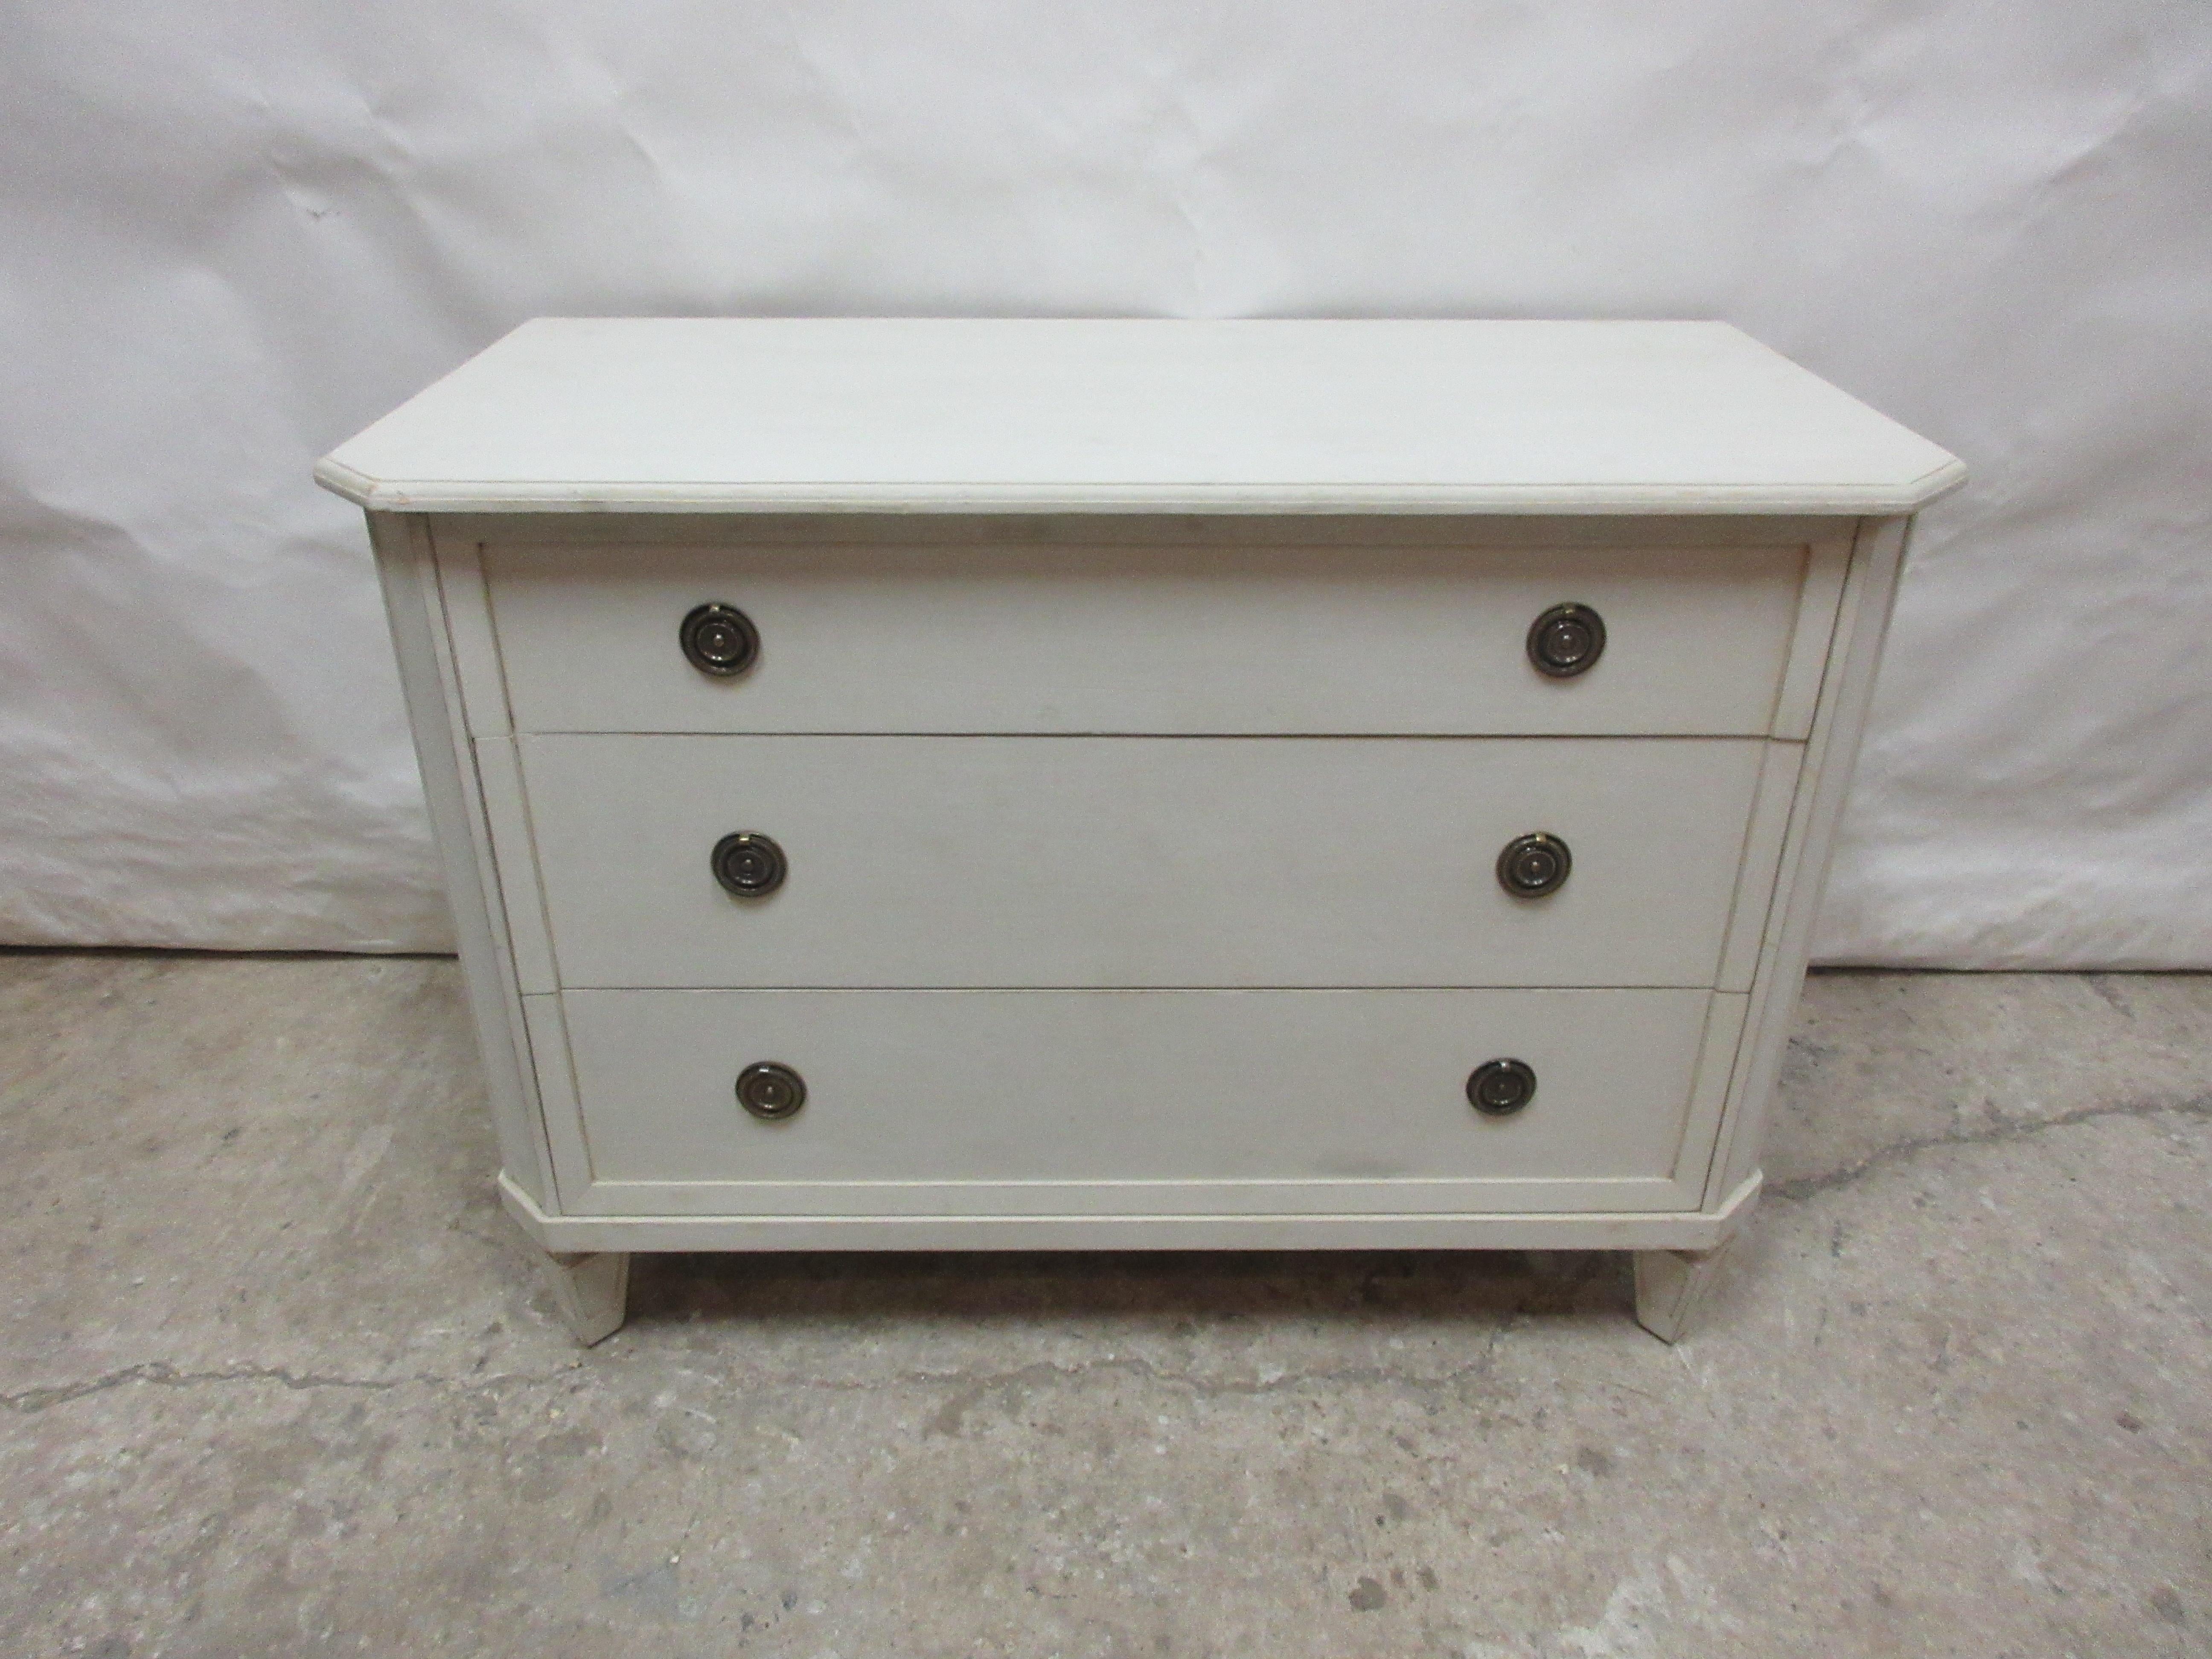 This is a Gustavian style 3 drawer chest, its been restored and repainted with Milk paints 